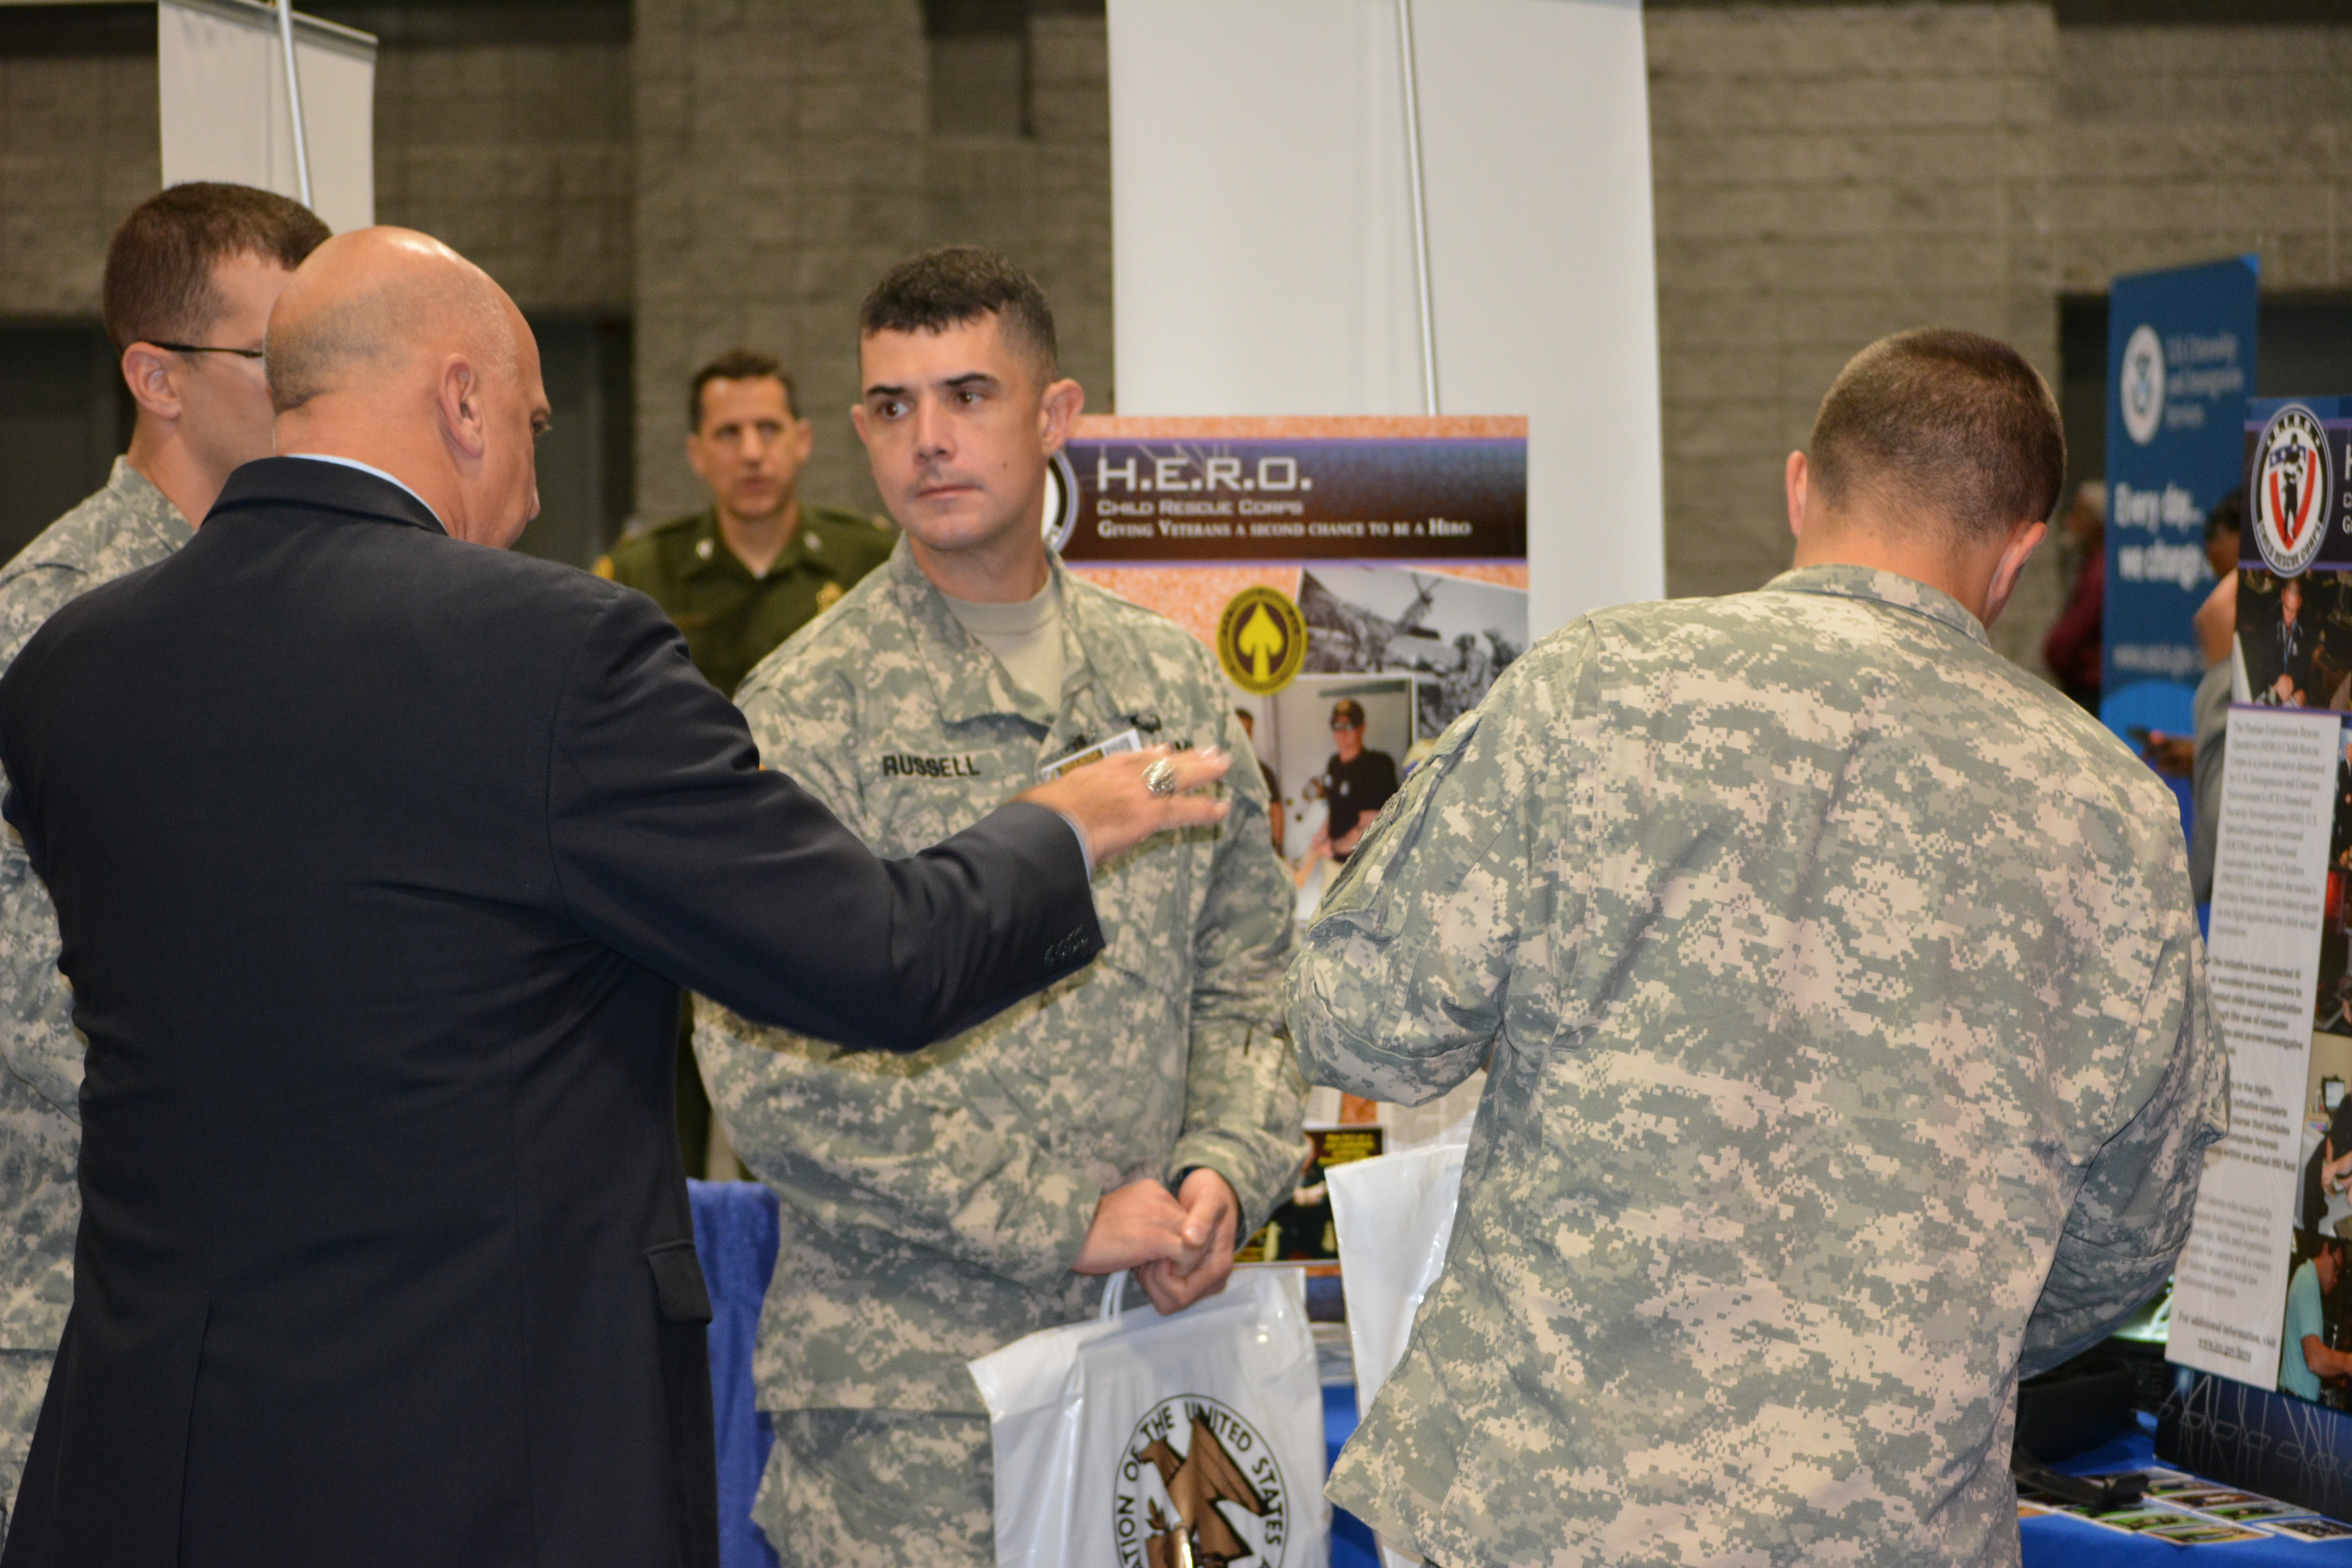 ICE showcases commitment to veterans at AUSA meeting 